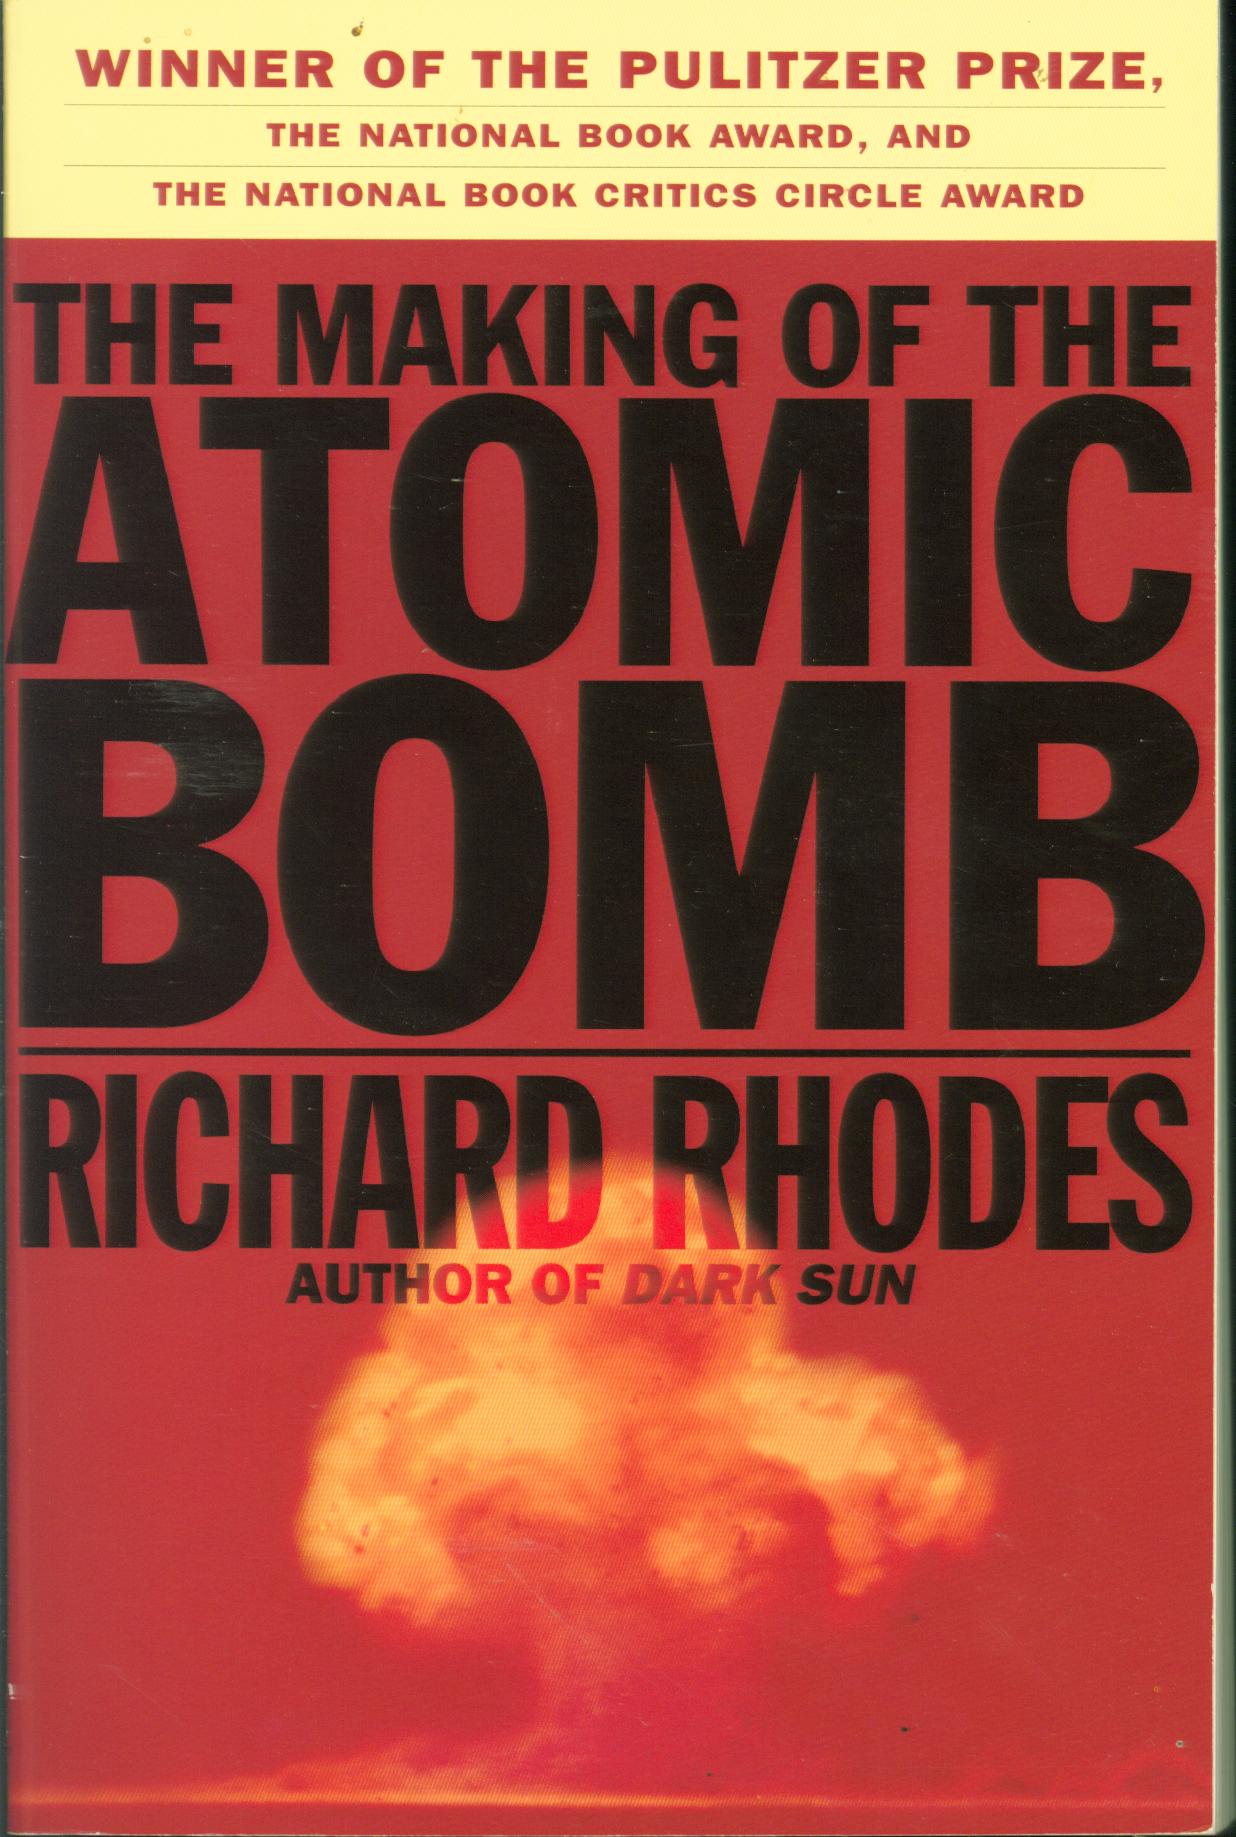 THE MAKING OF THE ATOMIC BOMB.